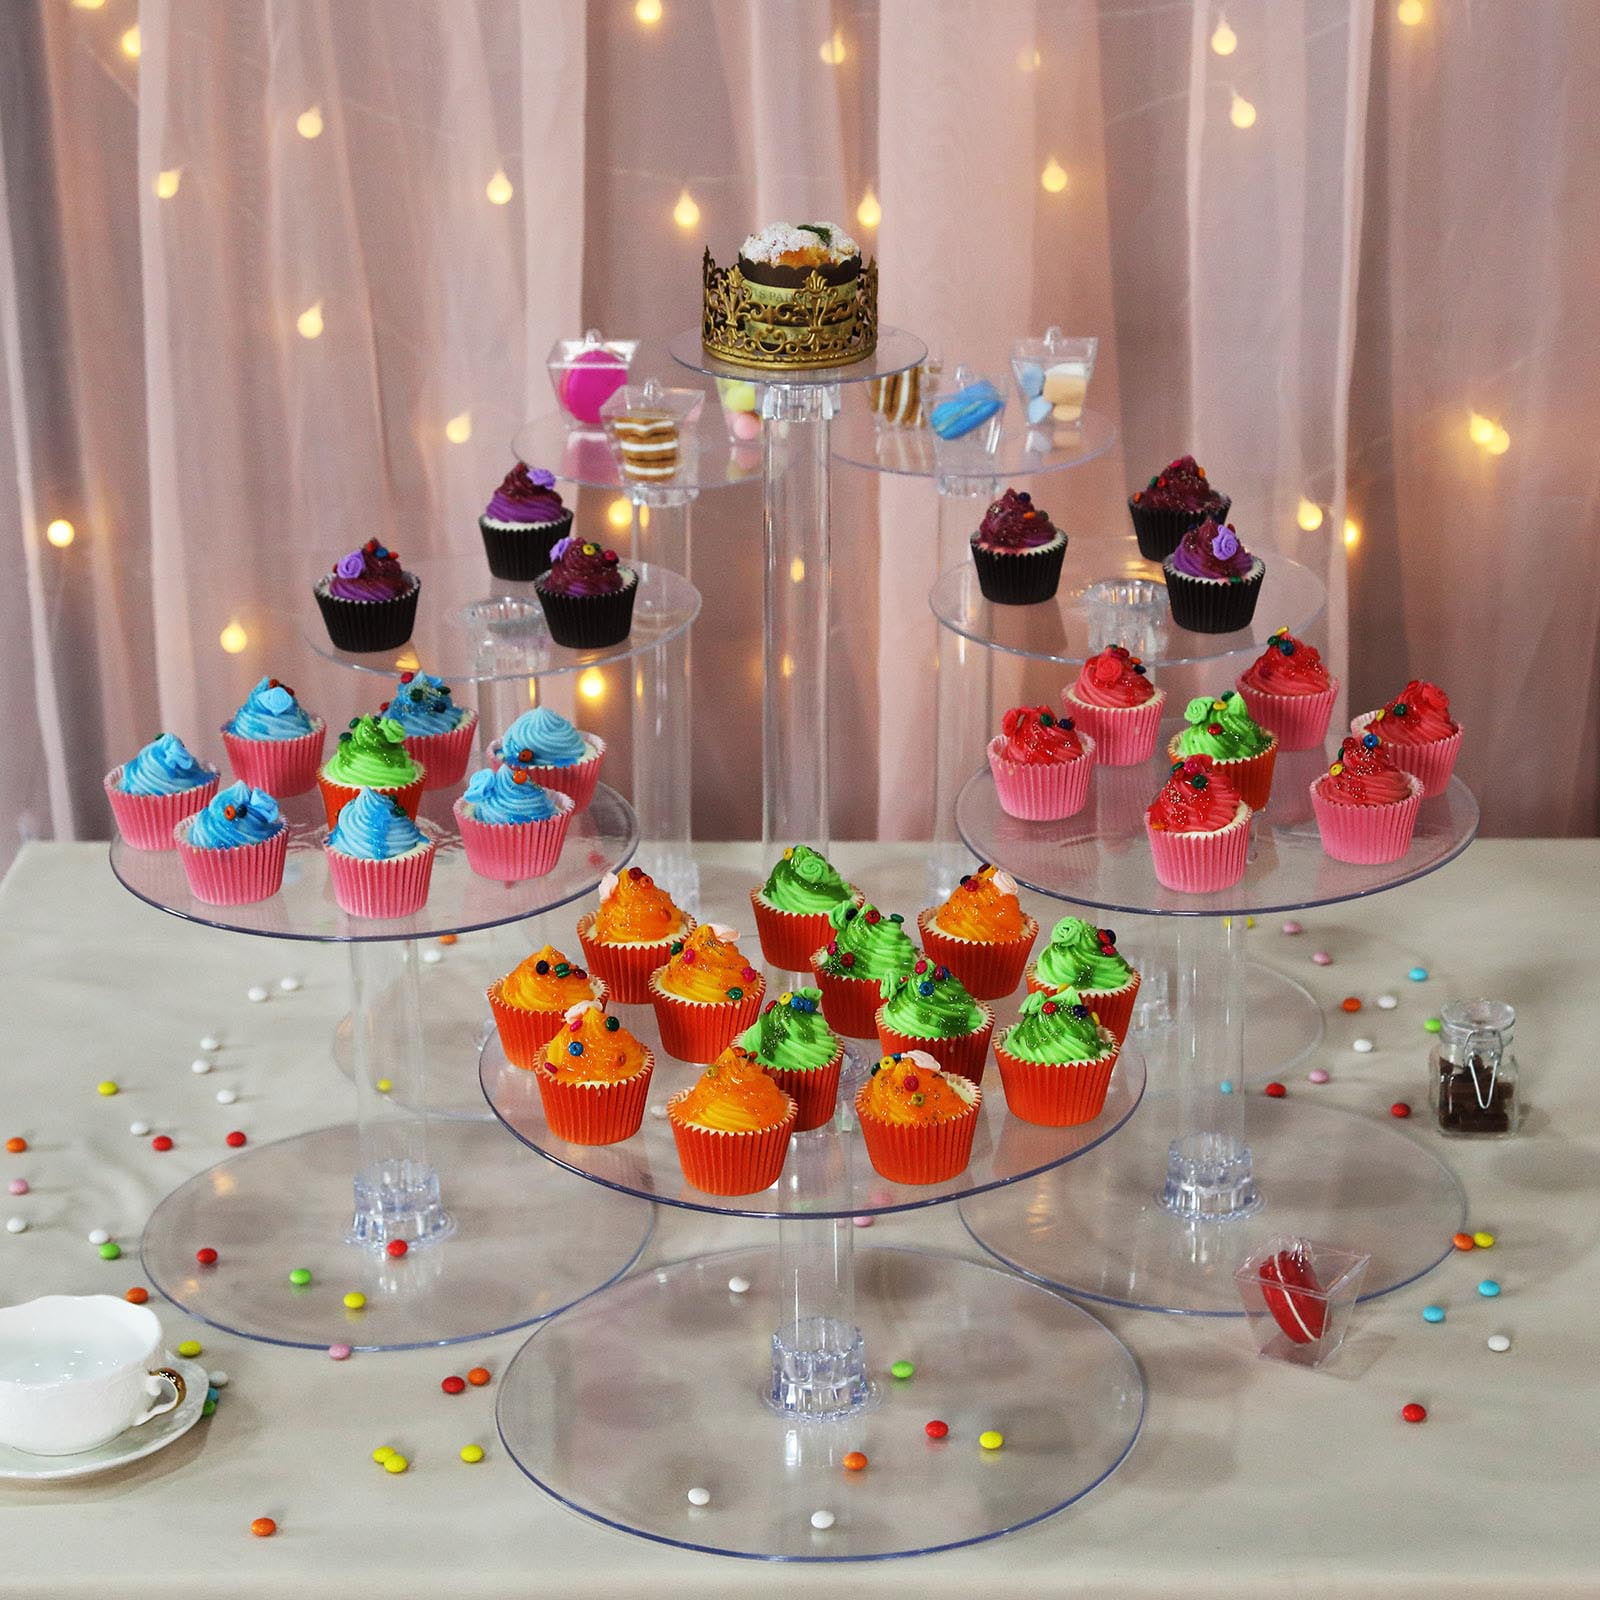 Cupcake Stand Tower 3 Tier Round Acrylic Dessert Cake Party Table Decoration DIY